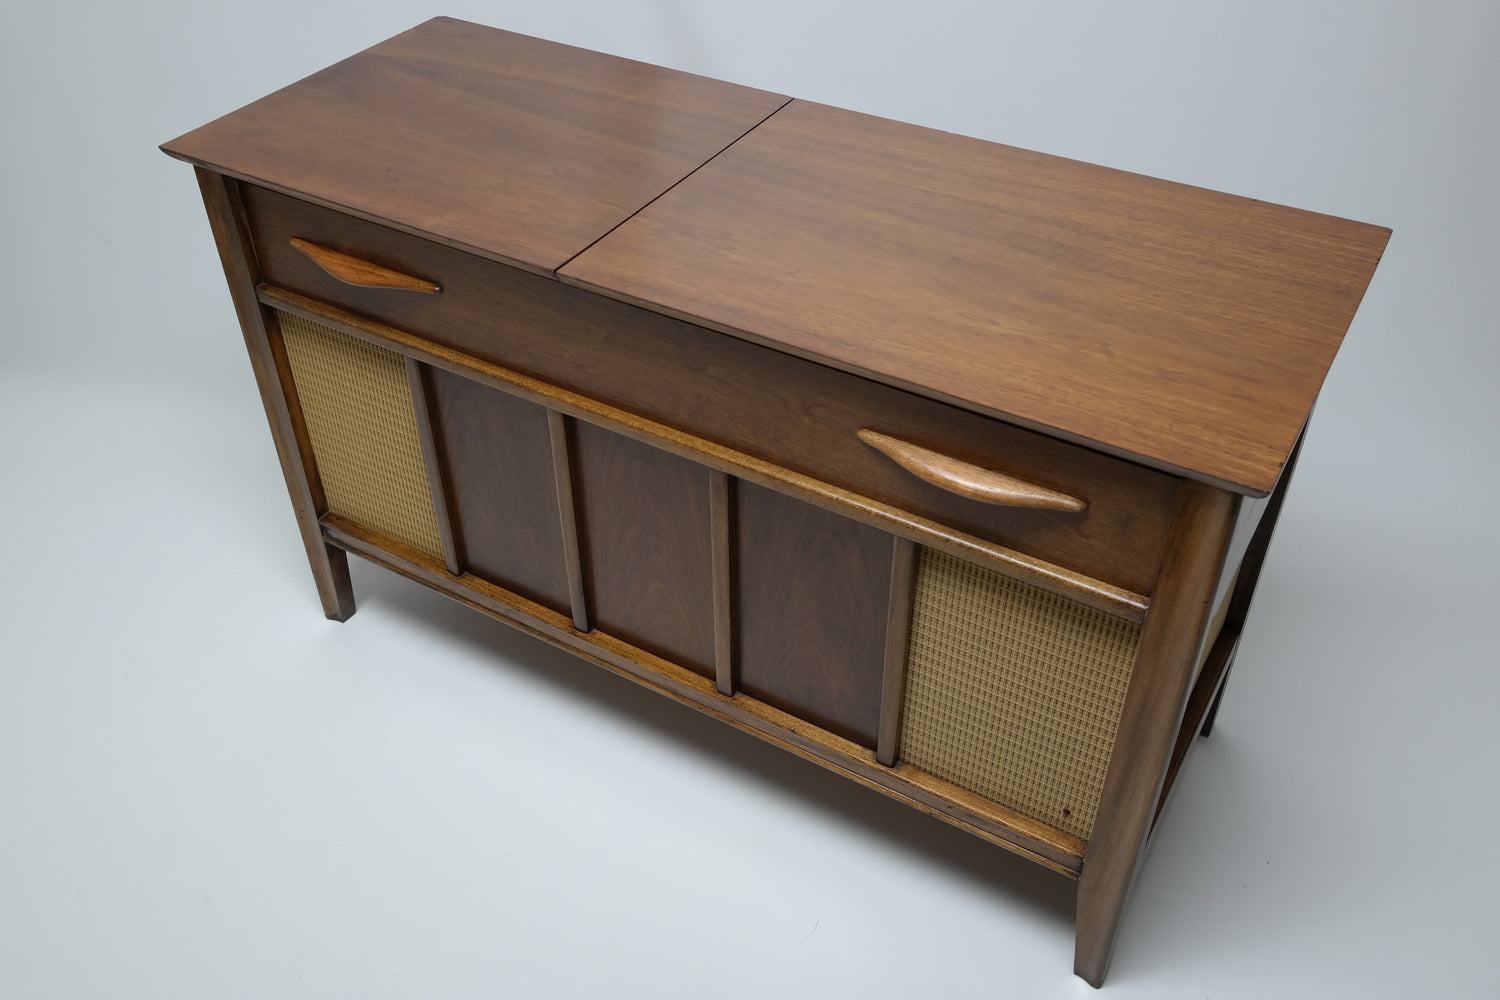 Mid Century Modern Stereo MINI Console Record Changer - AM/FM- Tuner - Bluetooth The Vintedge Co.